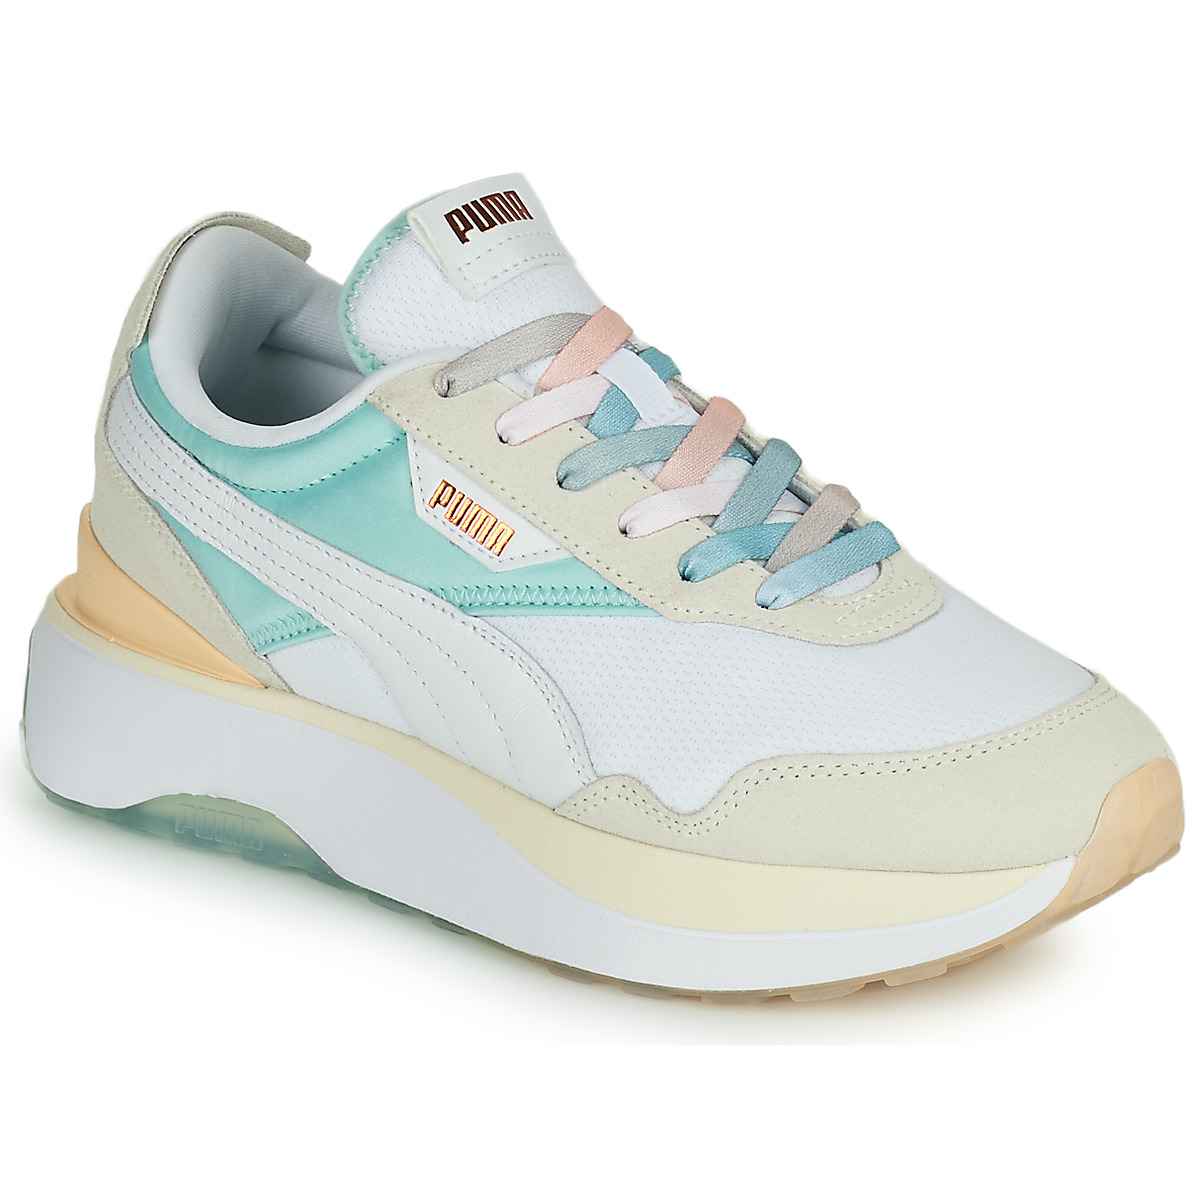 Chaussures Femme Sneakers PUMA stylish Suede Bow Jr 367316 02 Paradise Pink Paradise Pink CRUISE RIDER Blanc / Multicolore